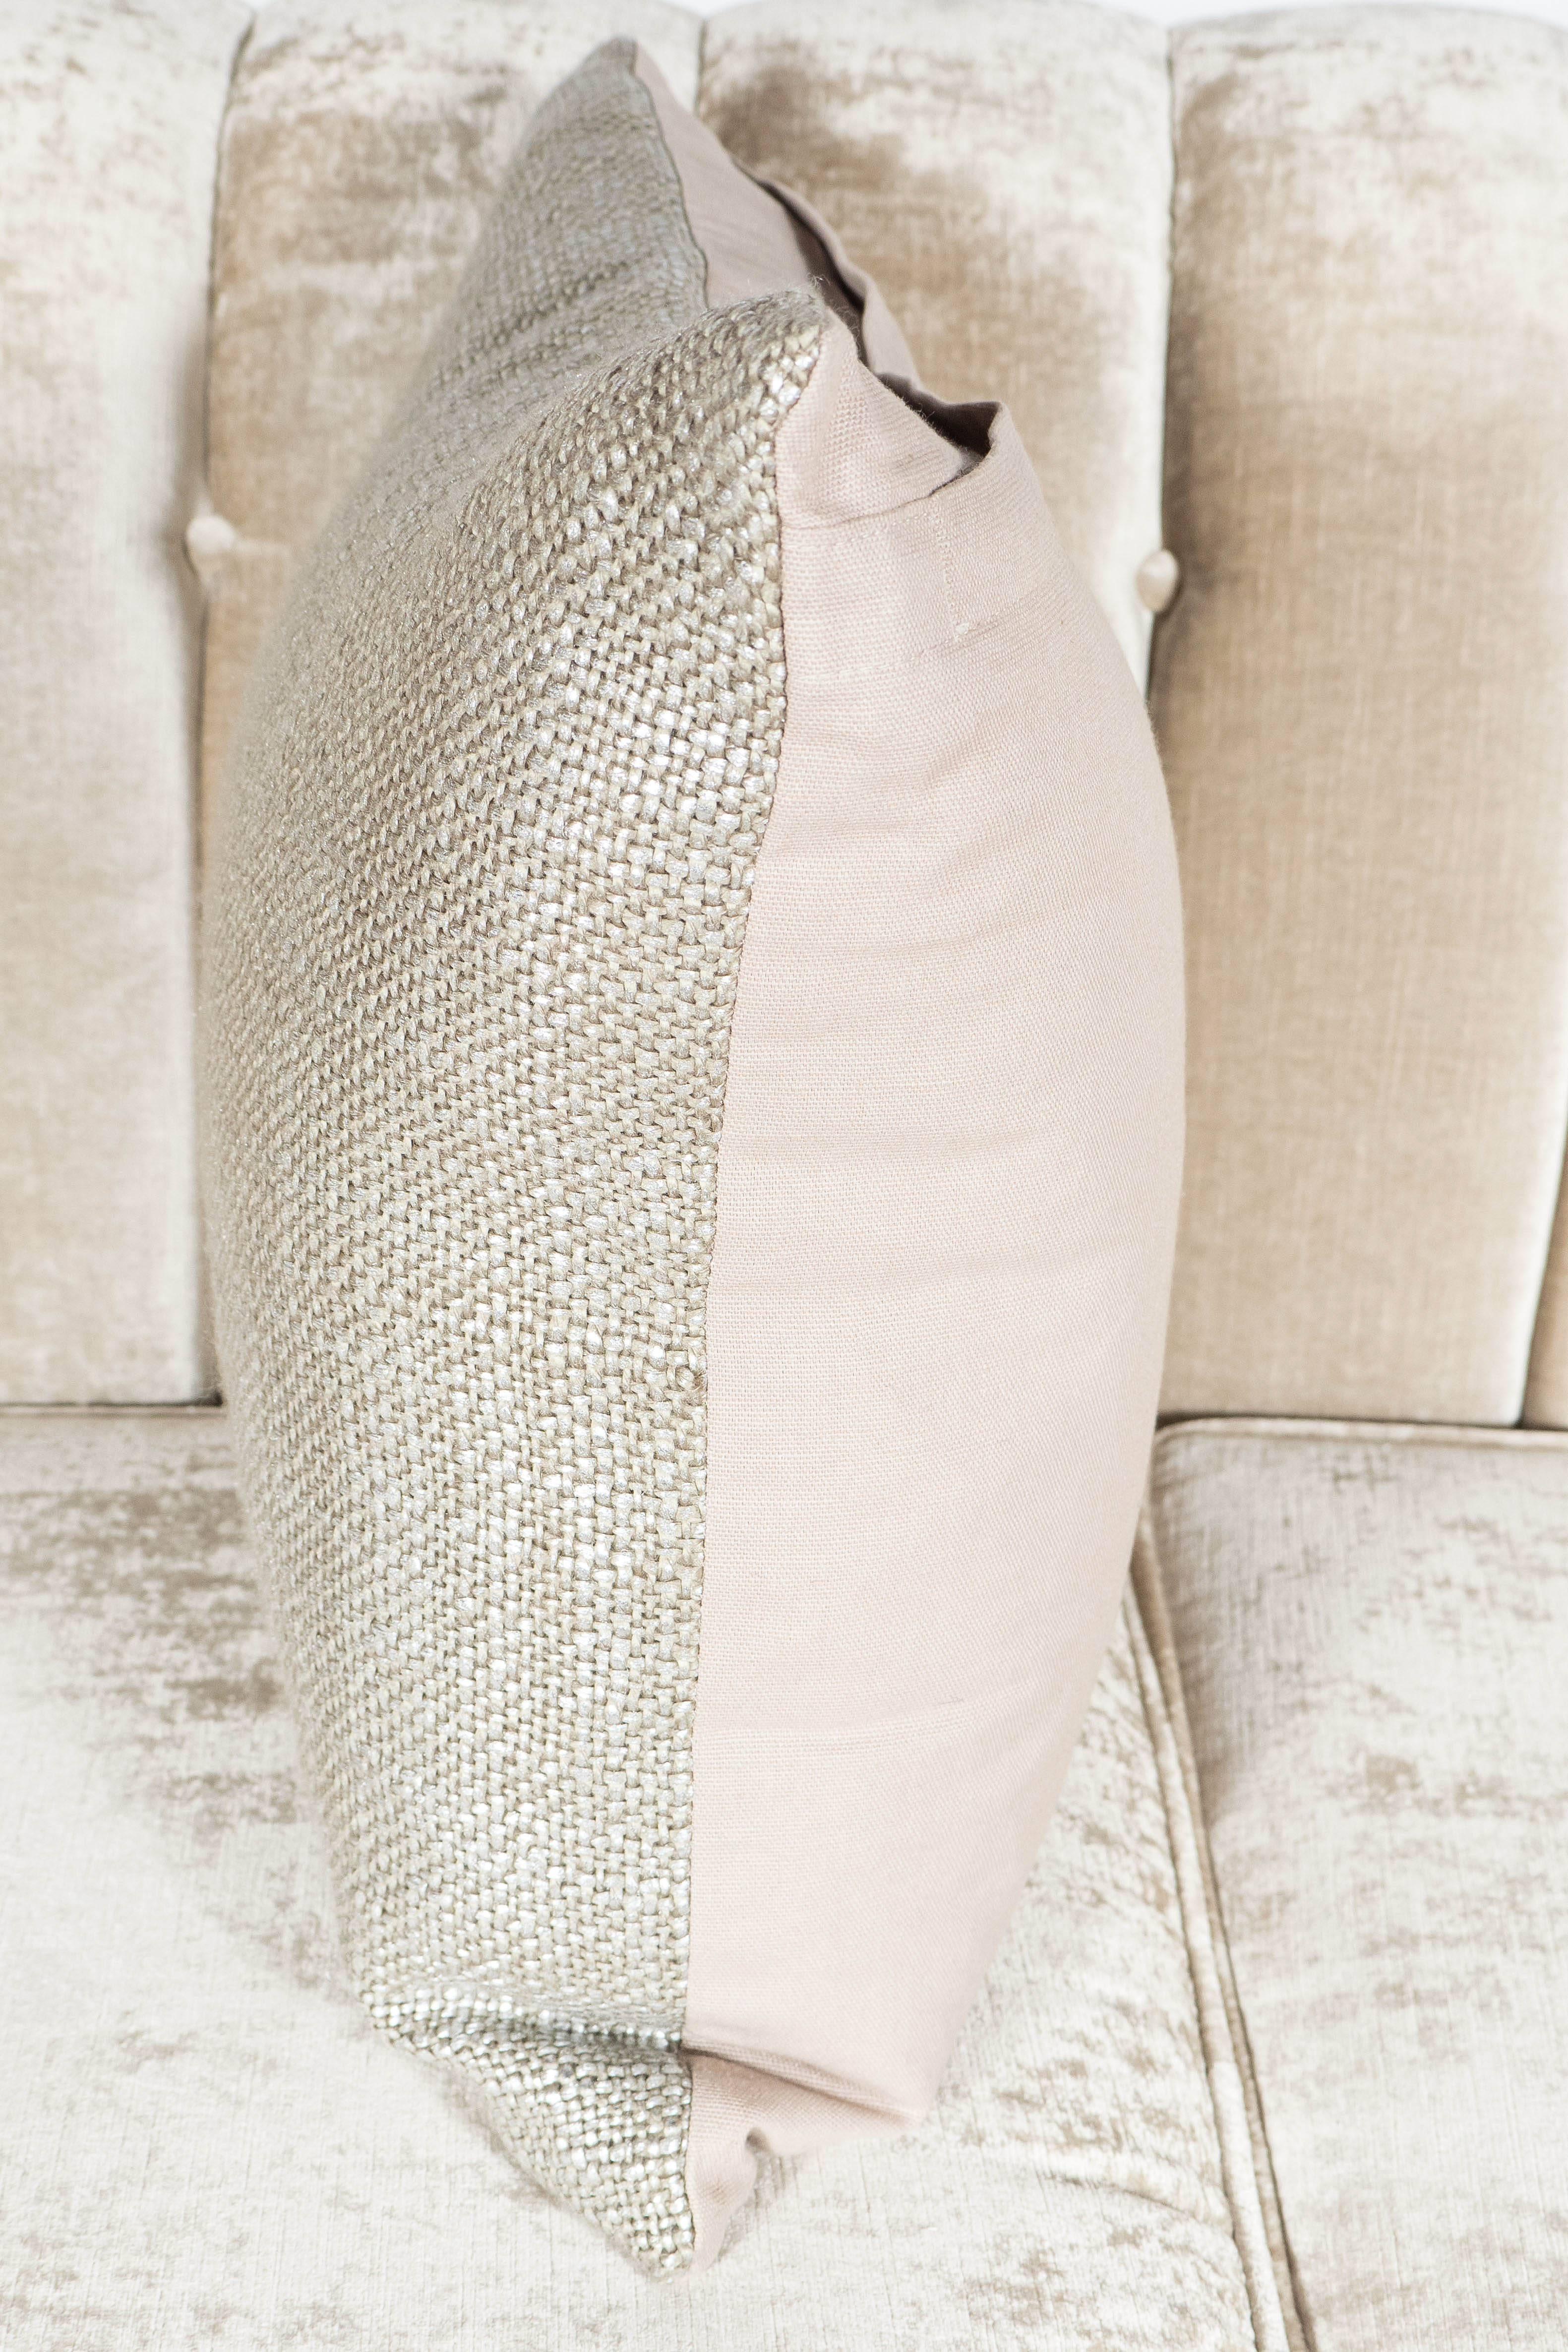 American Custom Textured Woven Metallic Platinum Pillow with Linen Backing For Sale